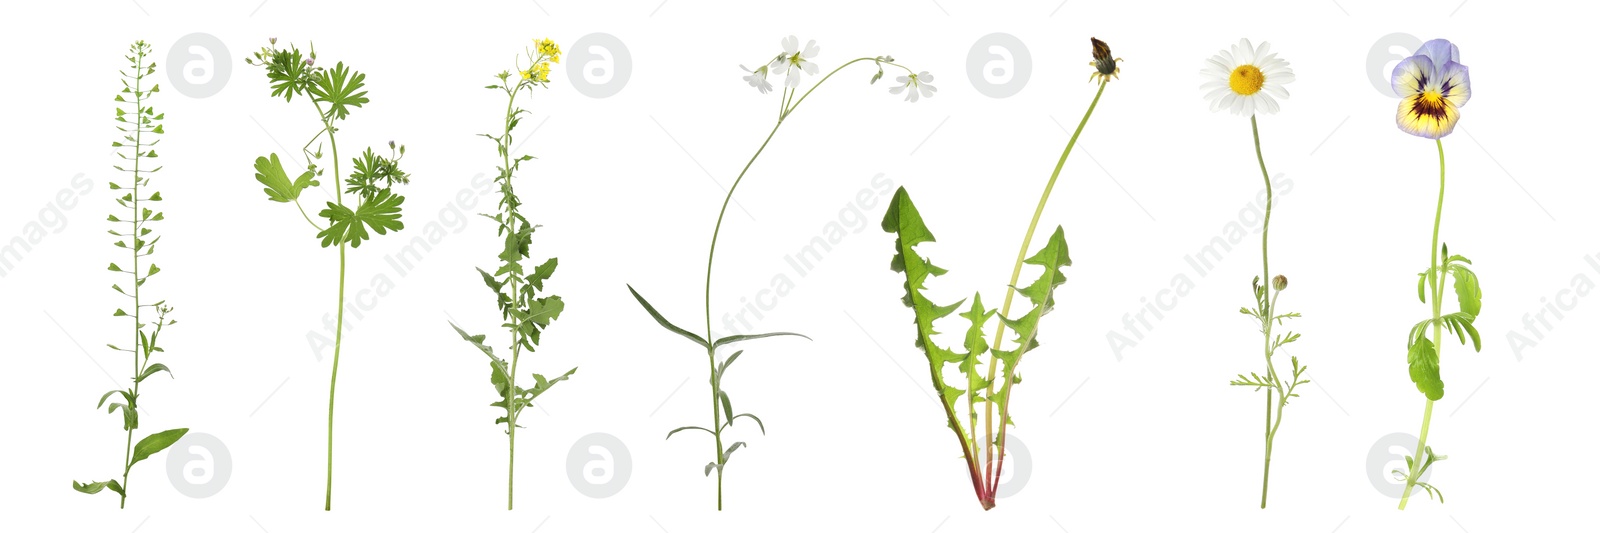 Image of Collection of different beautiful wild flowers on white background. Banner design